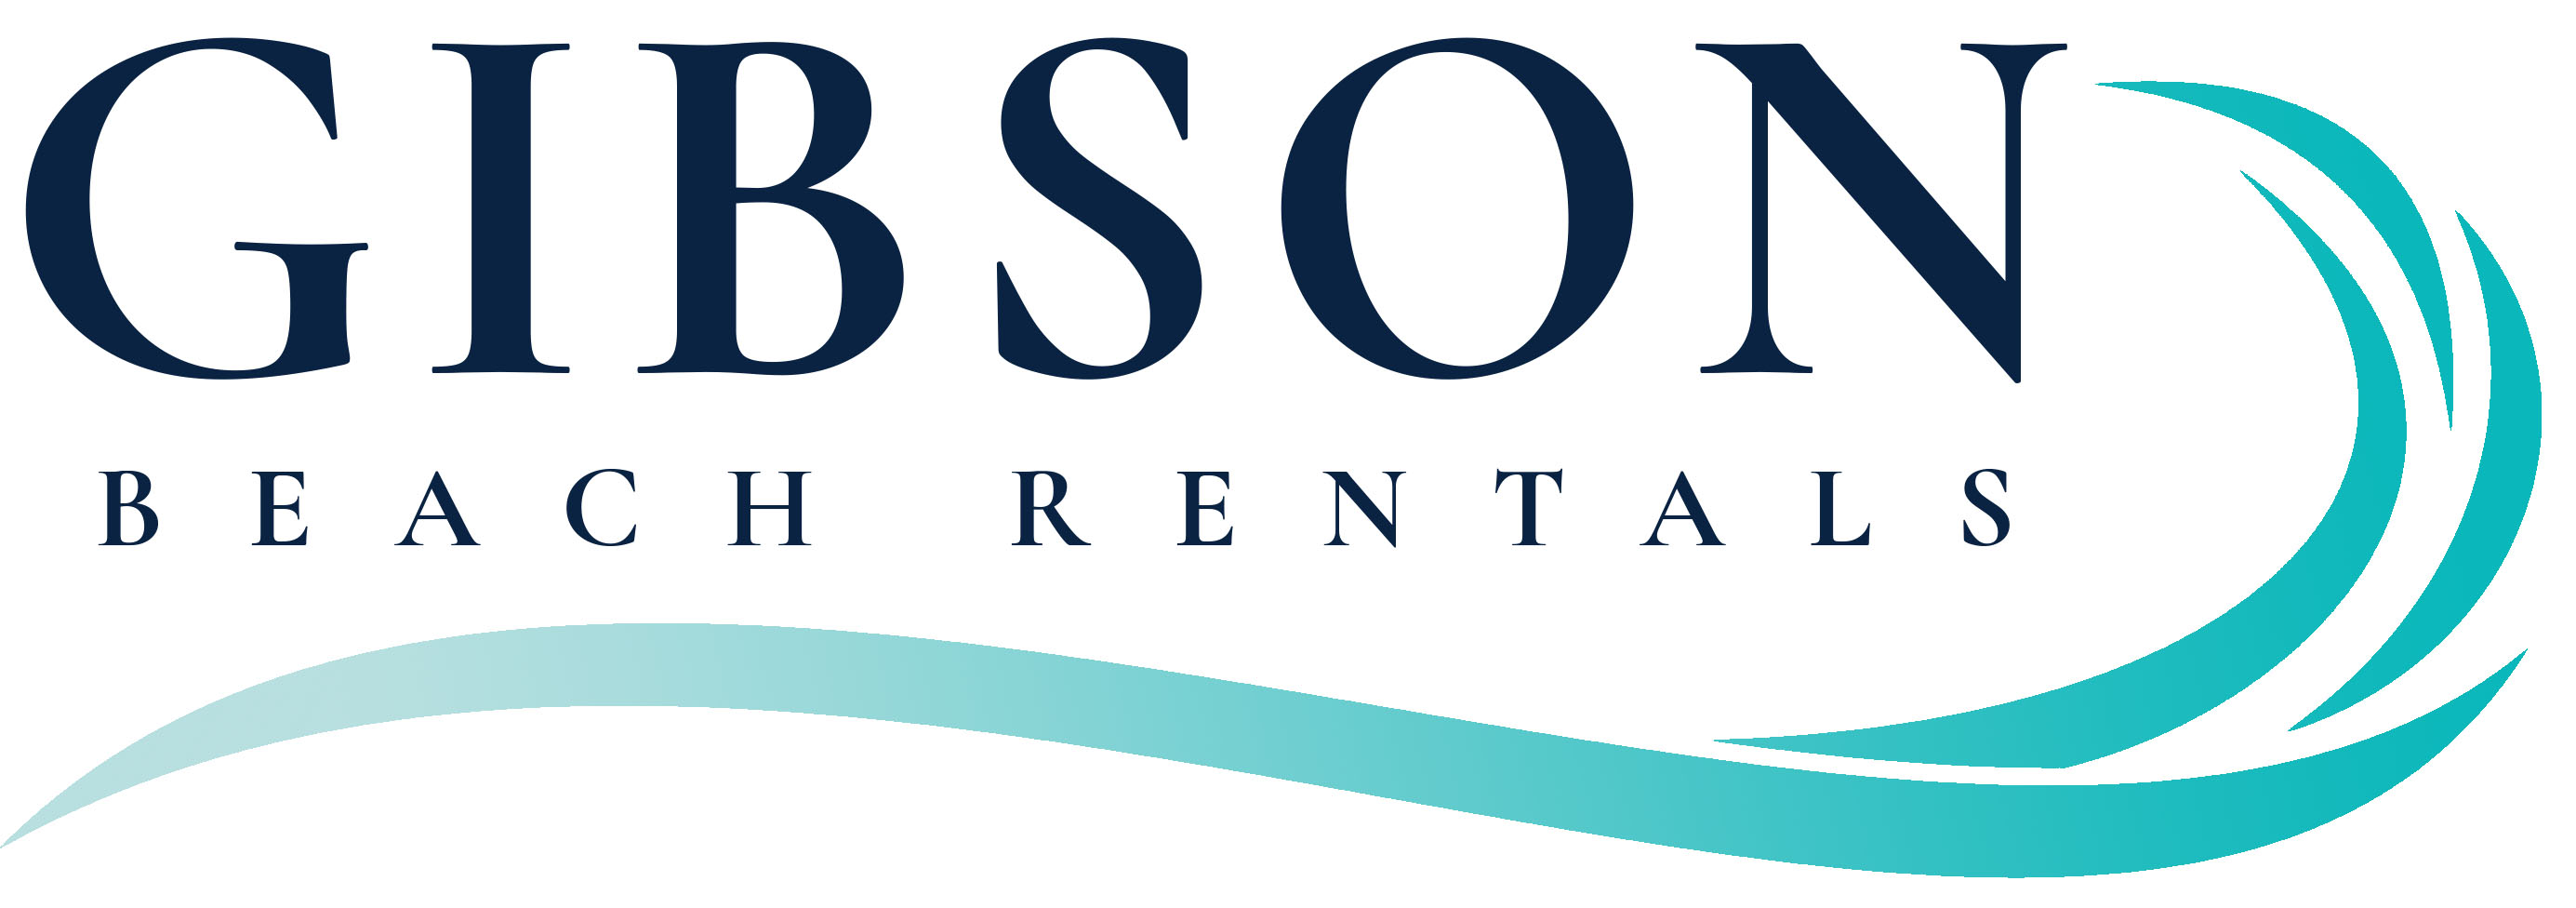 Gibson Beach Rentals - Property Management and Vacation Rentals in the Destin, Sandestin, Miramar Beach, and Panama City Beach Areas.